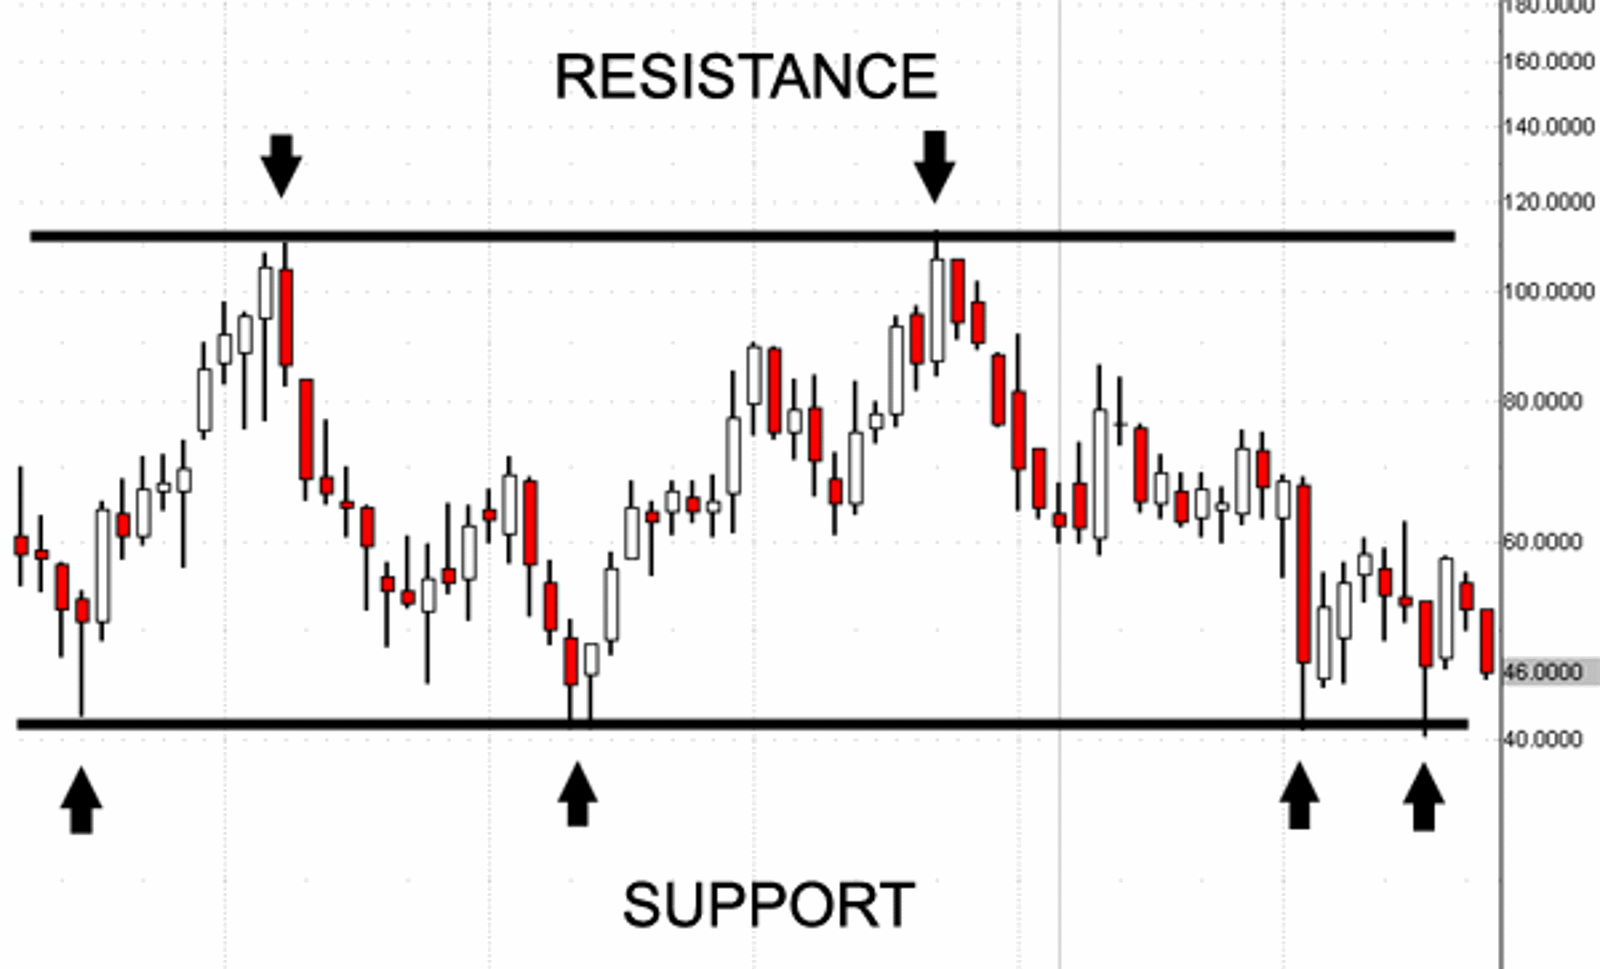 A suitable of description of support and resistance for online stock trading purposes: a ball hits the floor and bounces. It drops after it hits the ceiling. Support and resistance is like a floor and a ceiling, with prices sandwiched between them.